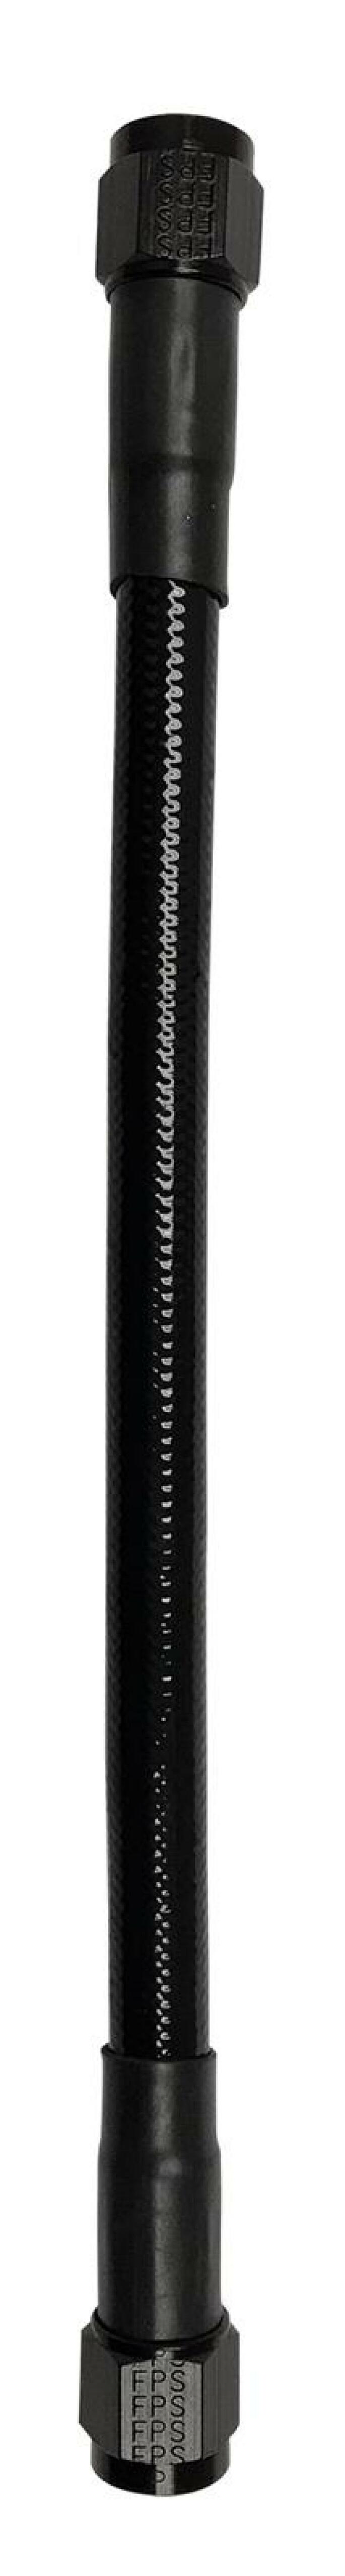 Fragola -10AN Ext Black PTFE Hose Assembly Straight x Straight 60in - 6029-1-1-60BL